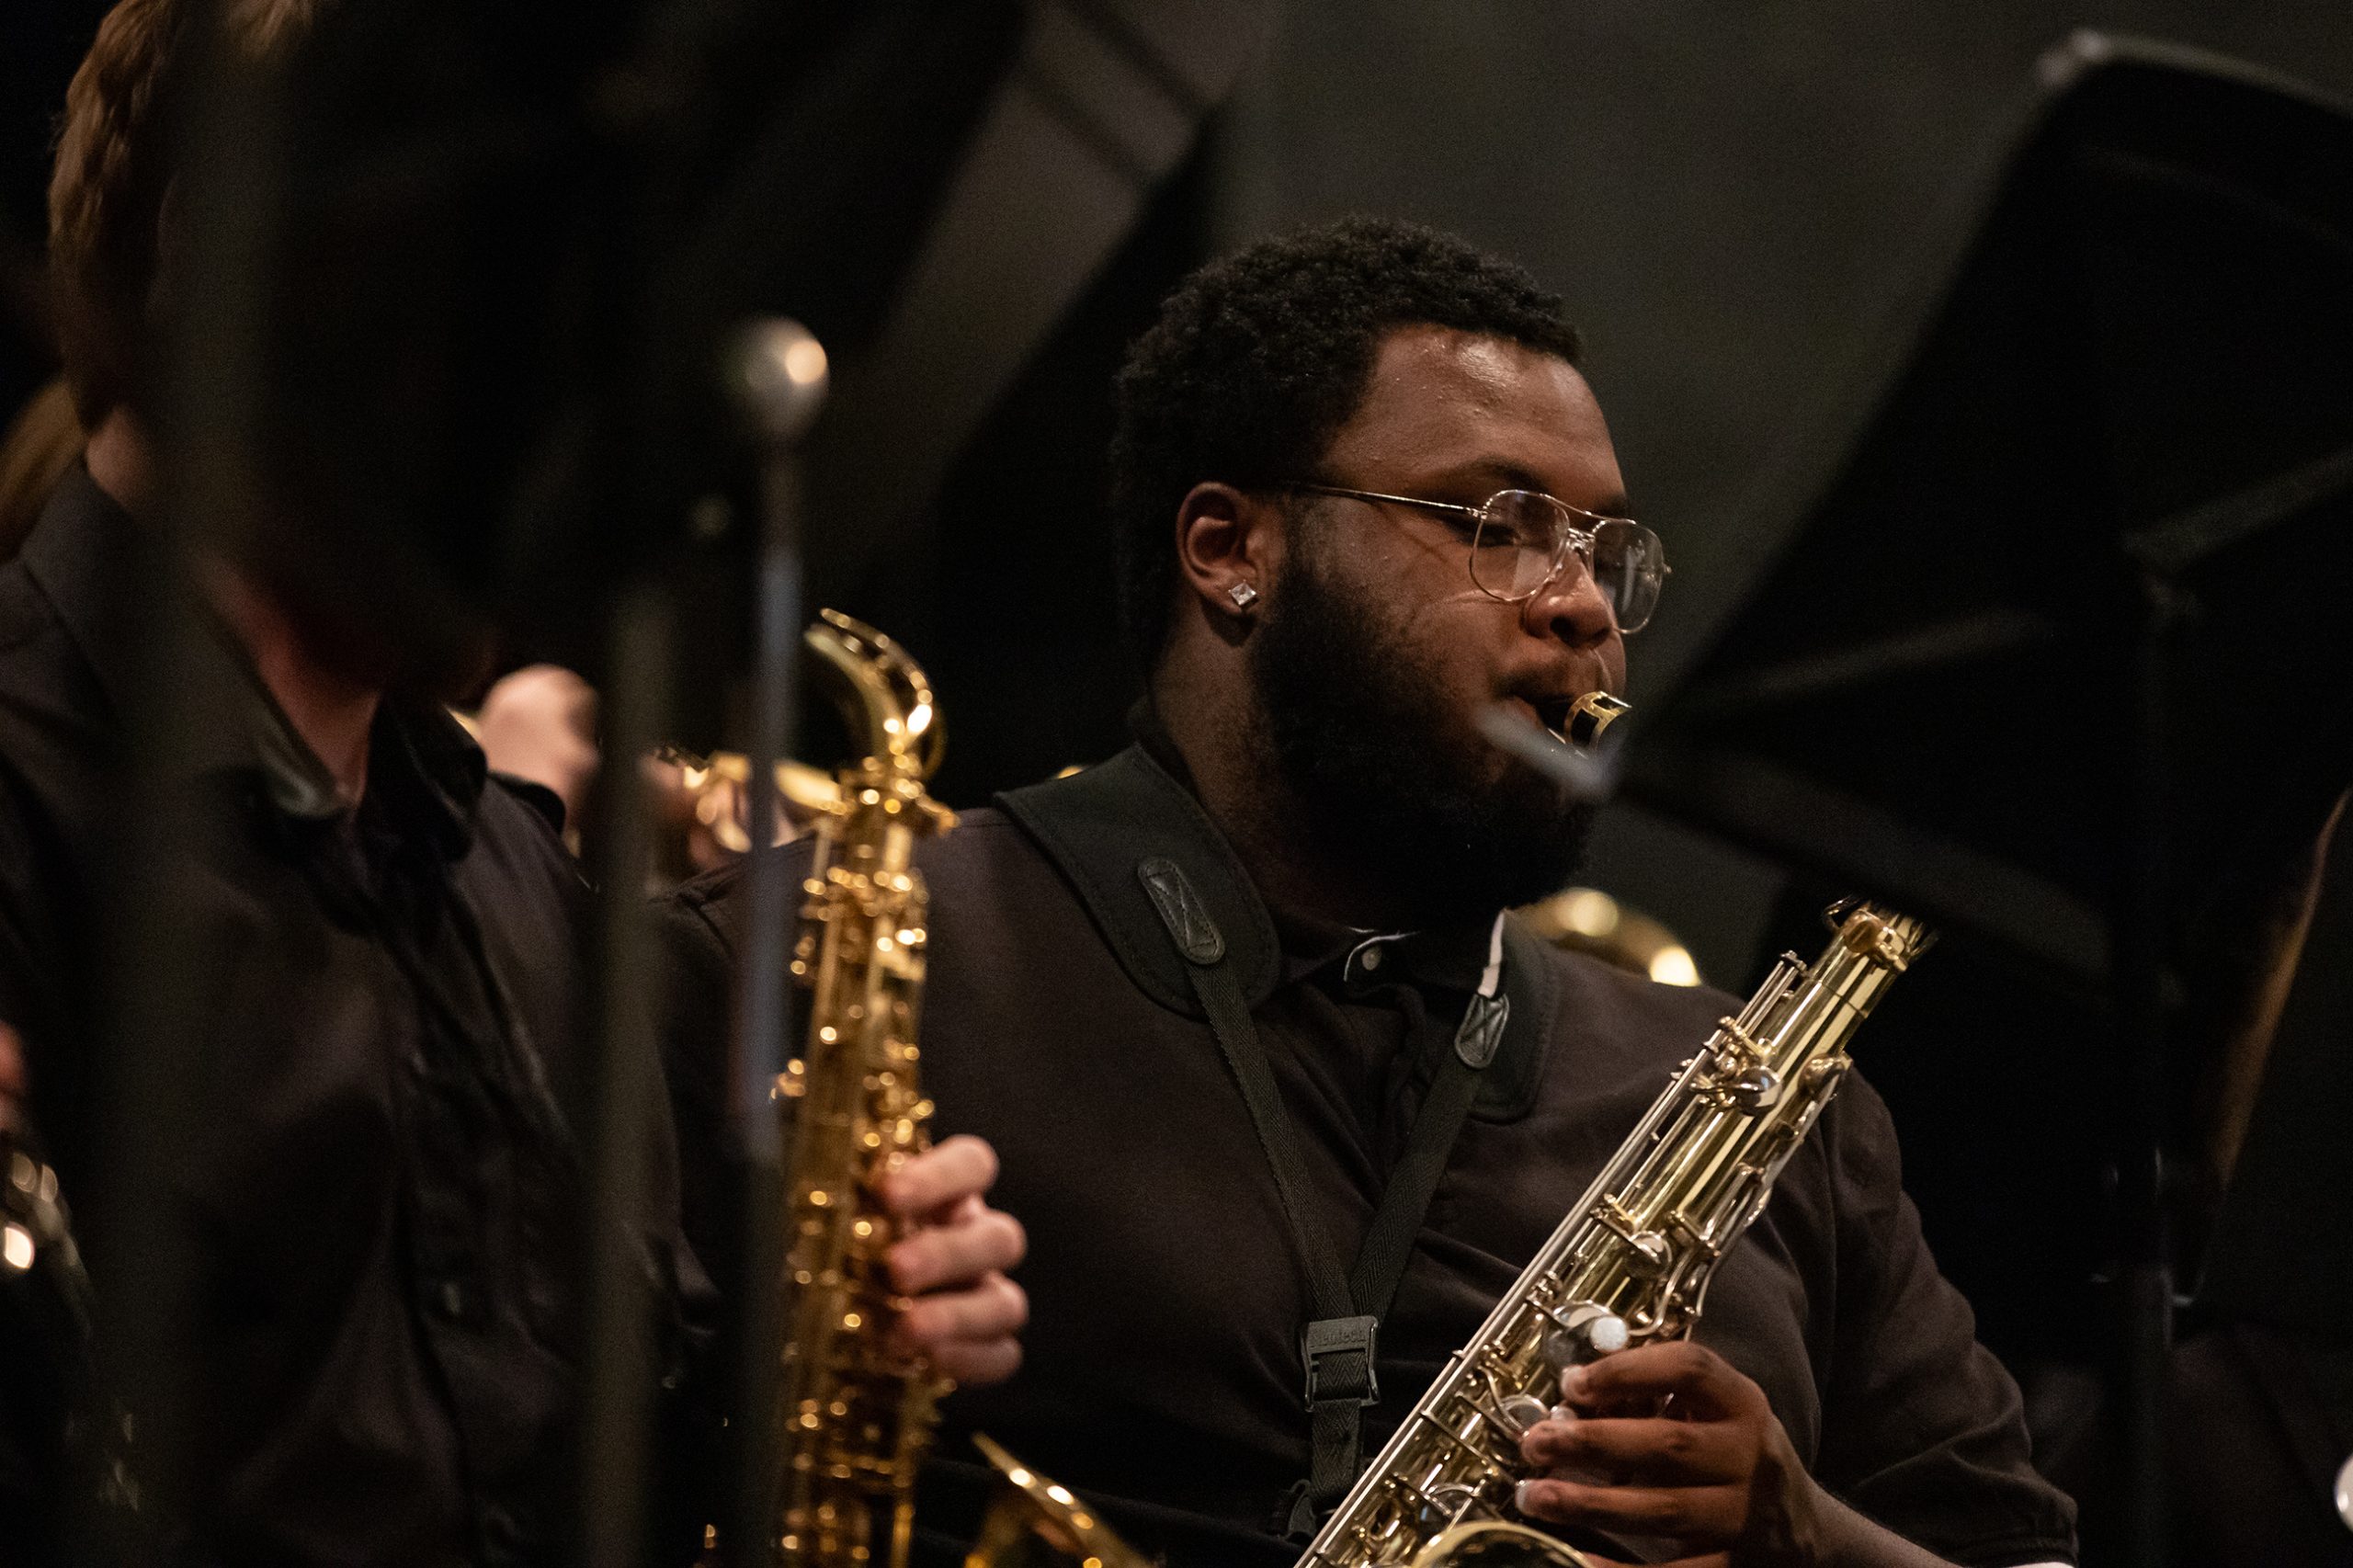 Music student playing the saxophone during a performance